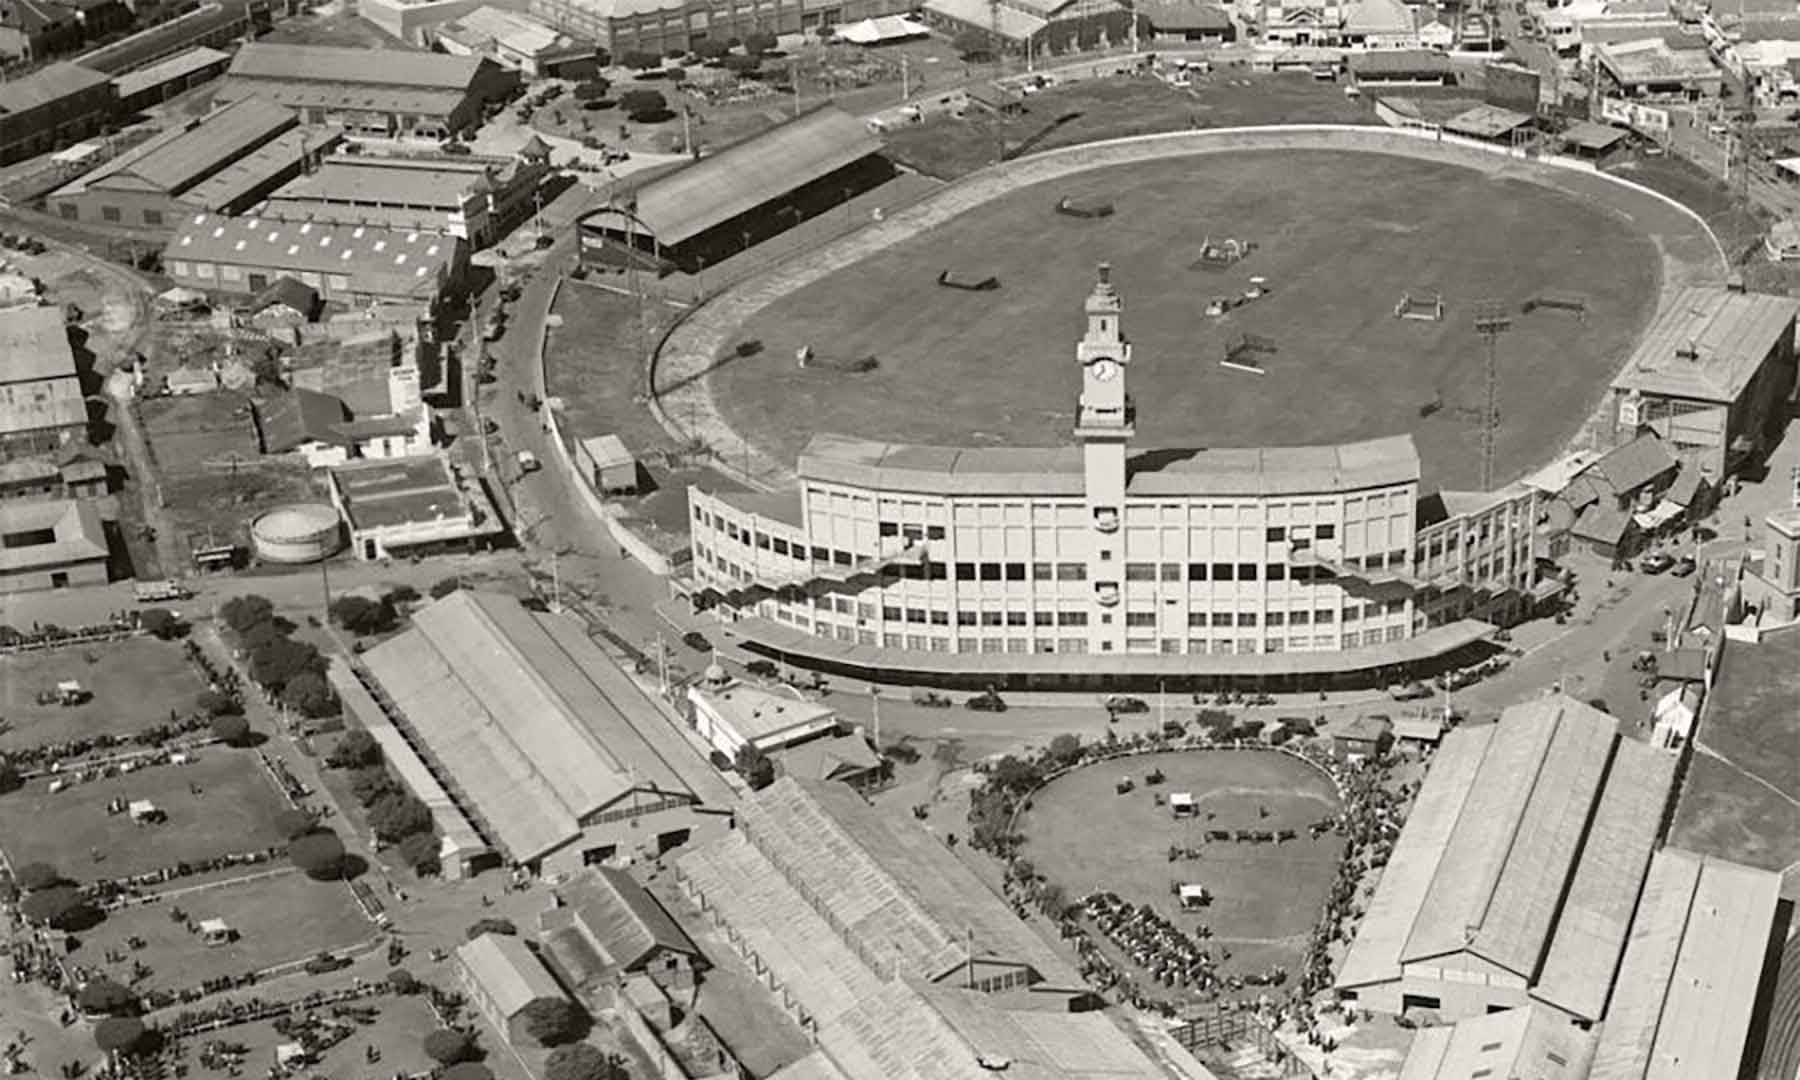 Sydney Showground, small rings, Easter 1936 [RAHS Adastra Collection]